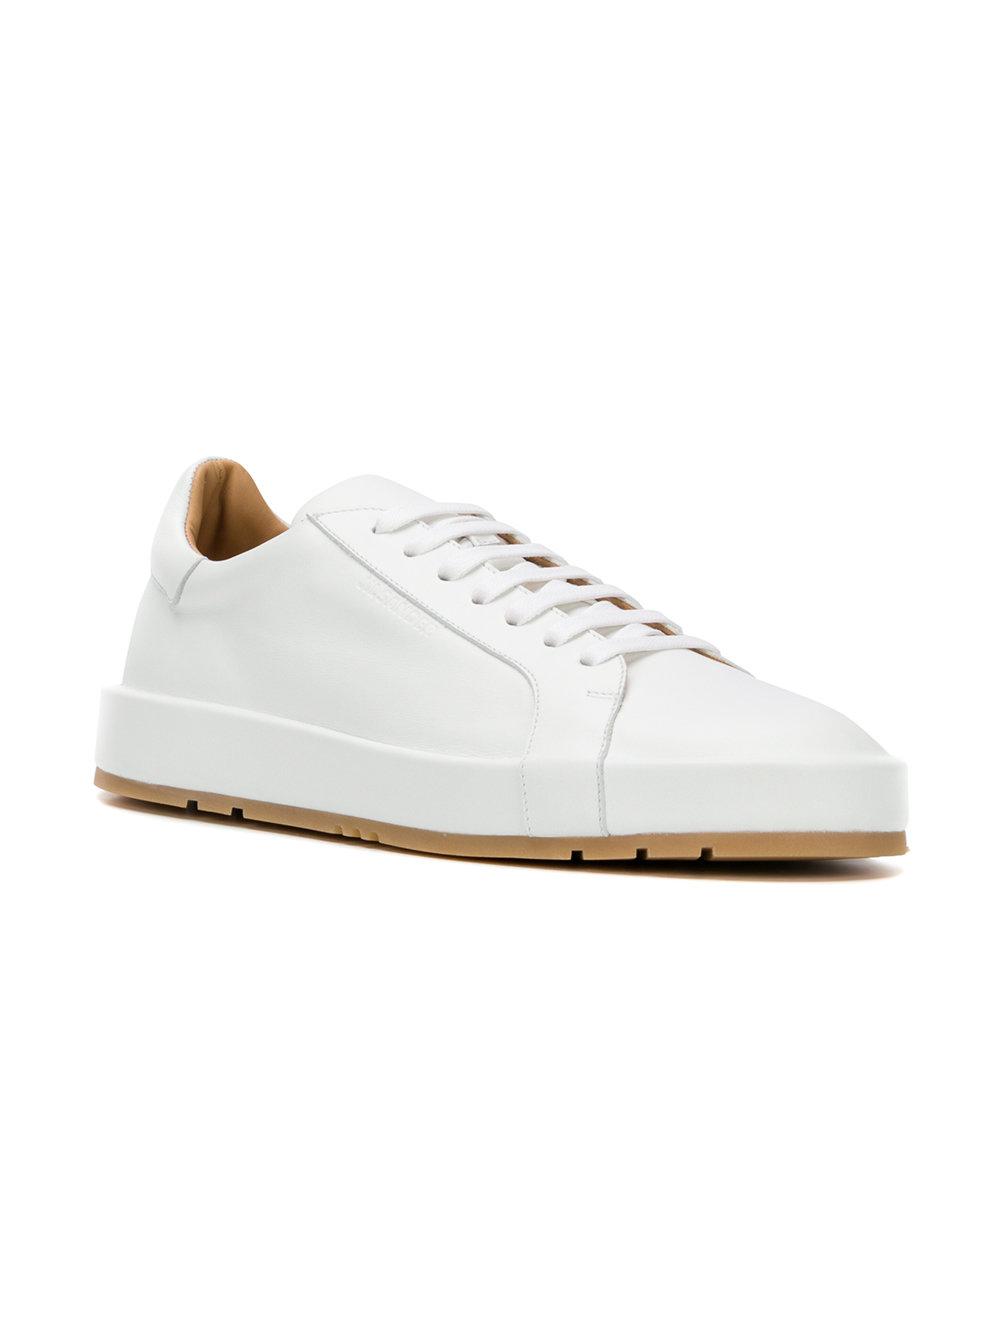 Jil Sander Leather Classic Low Top Sneakers in White - Lyst